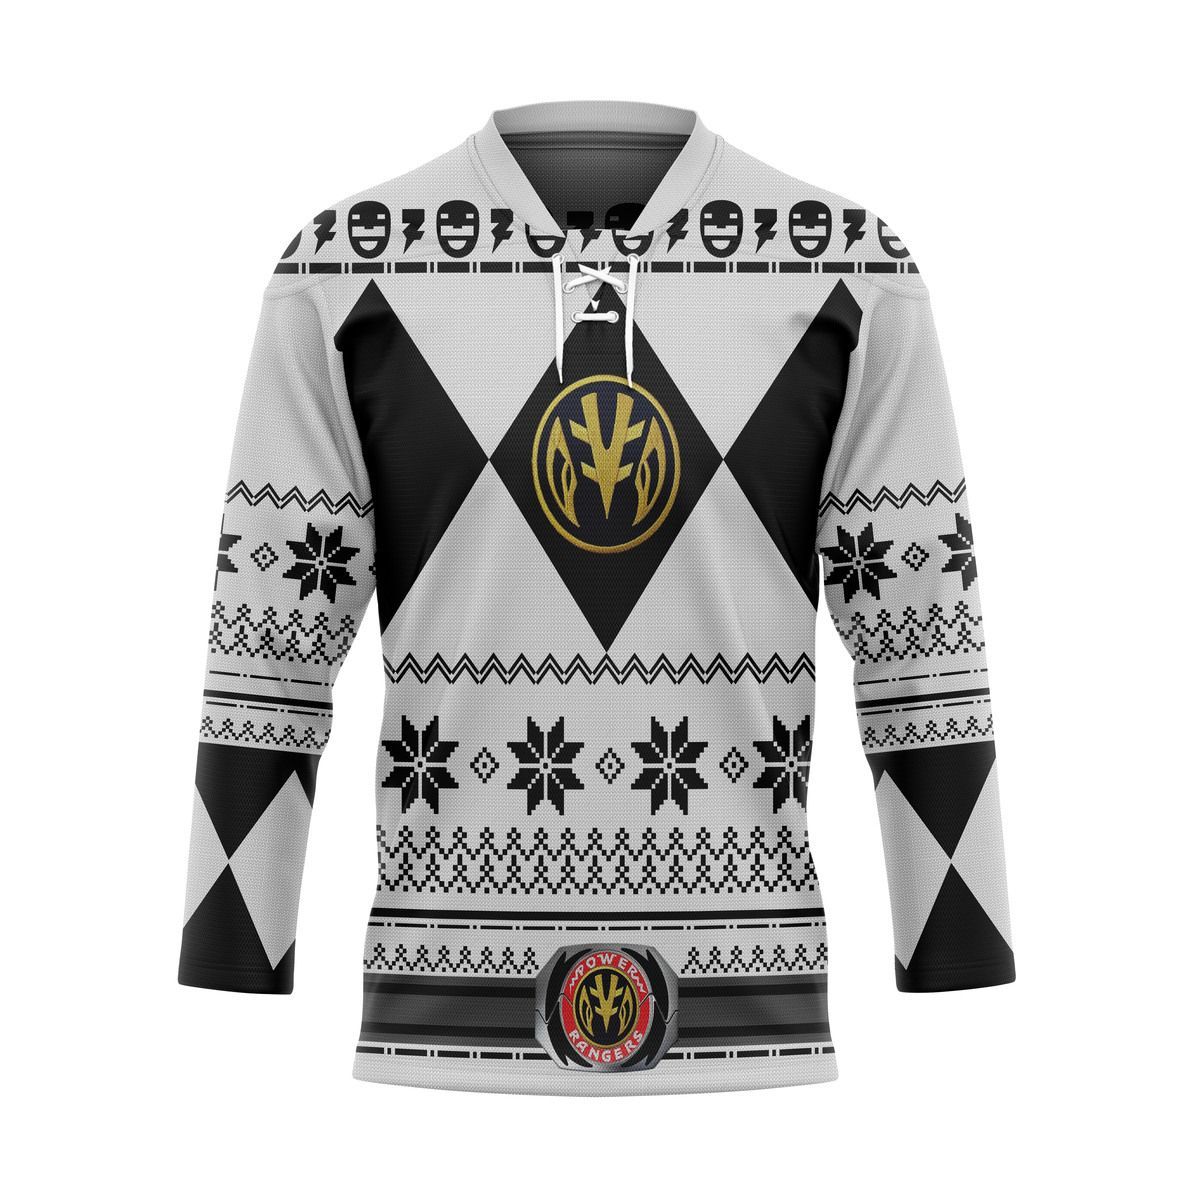 Top cool Hockey jersey for fan You can buy online. 107